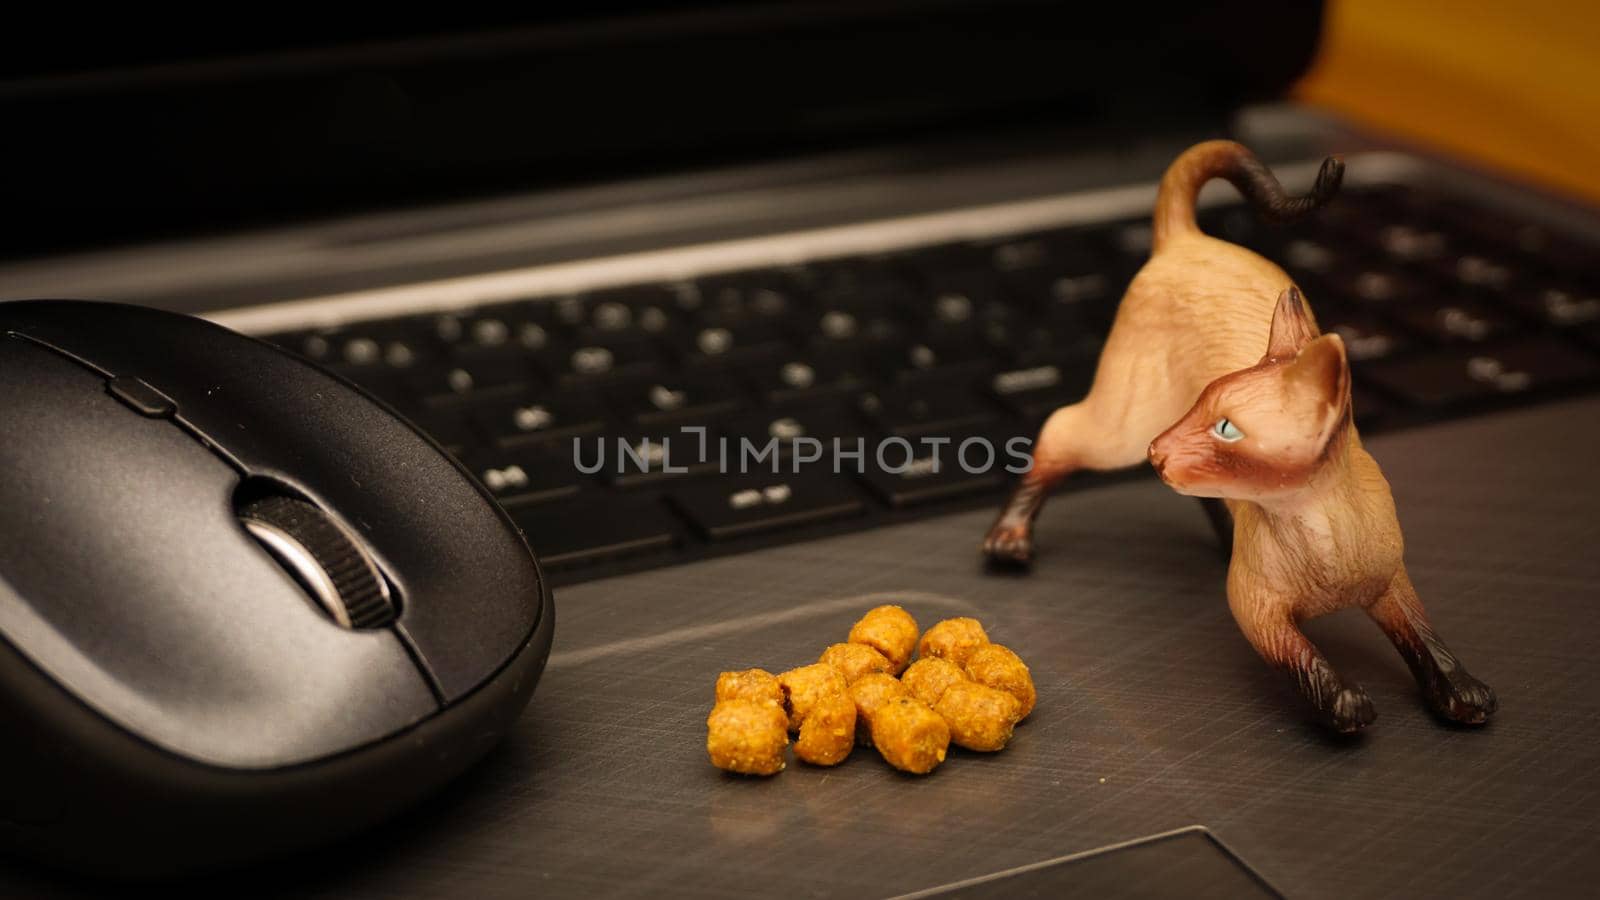 Online cat food illustration with miniature objects concept shot